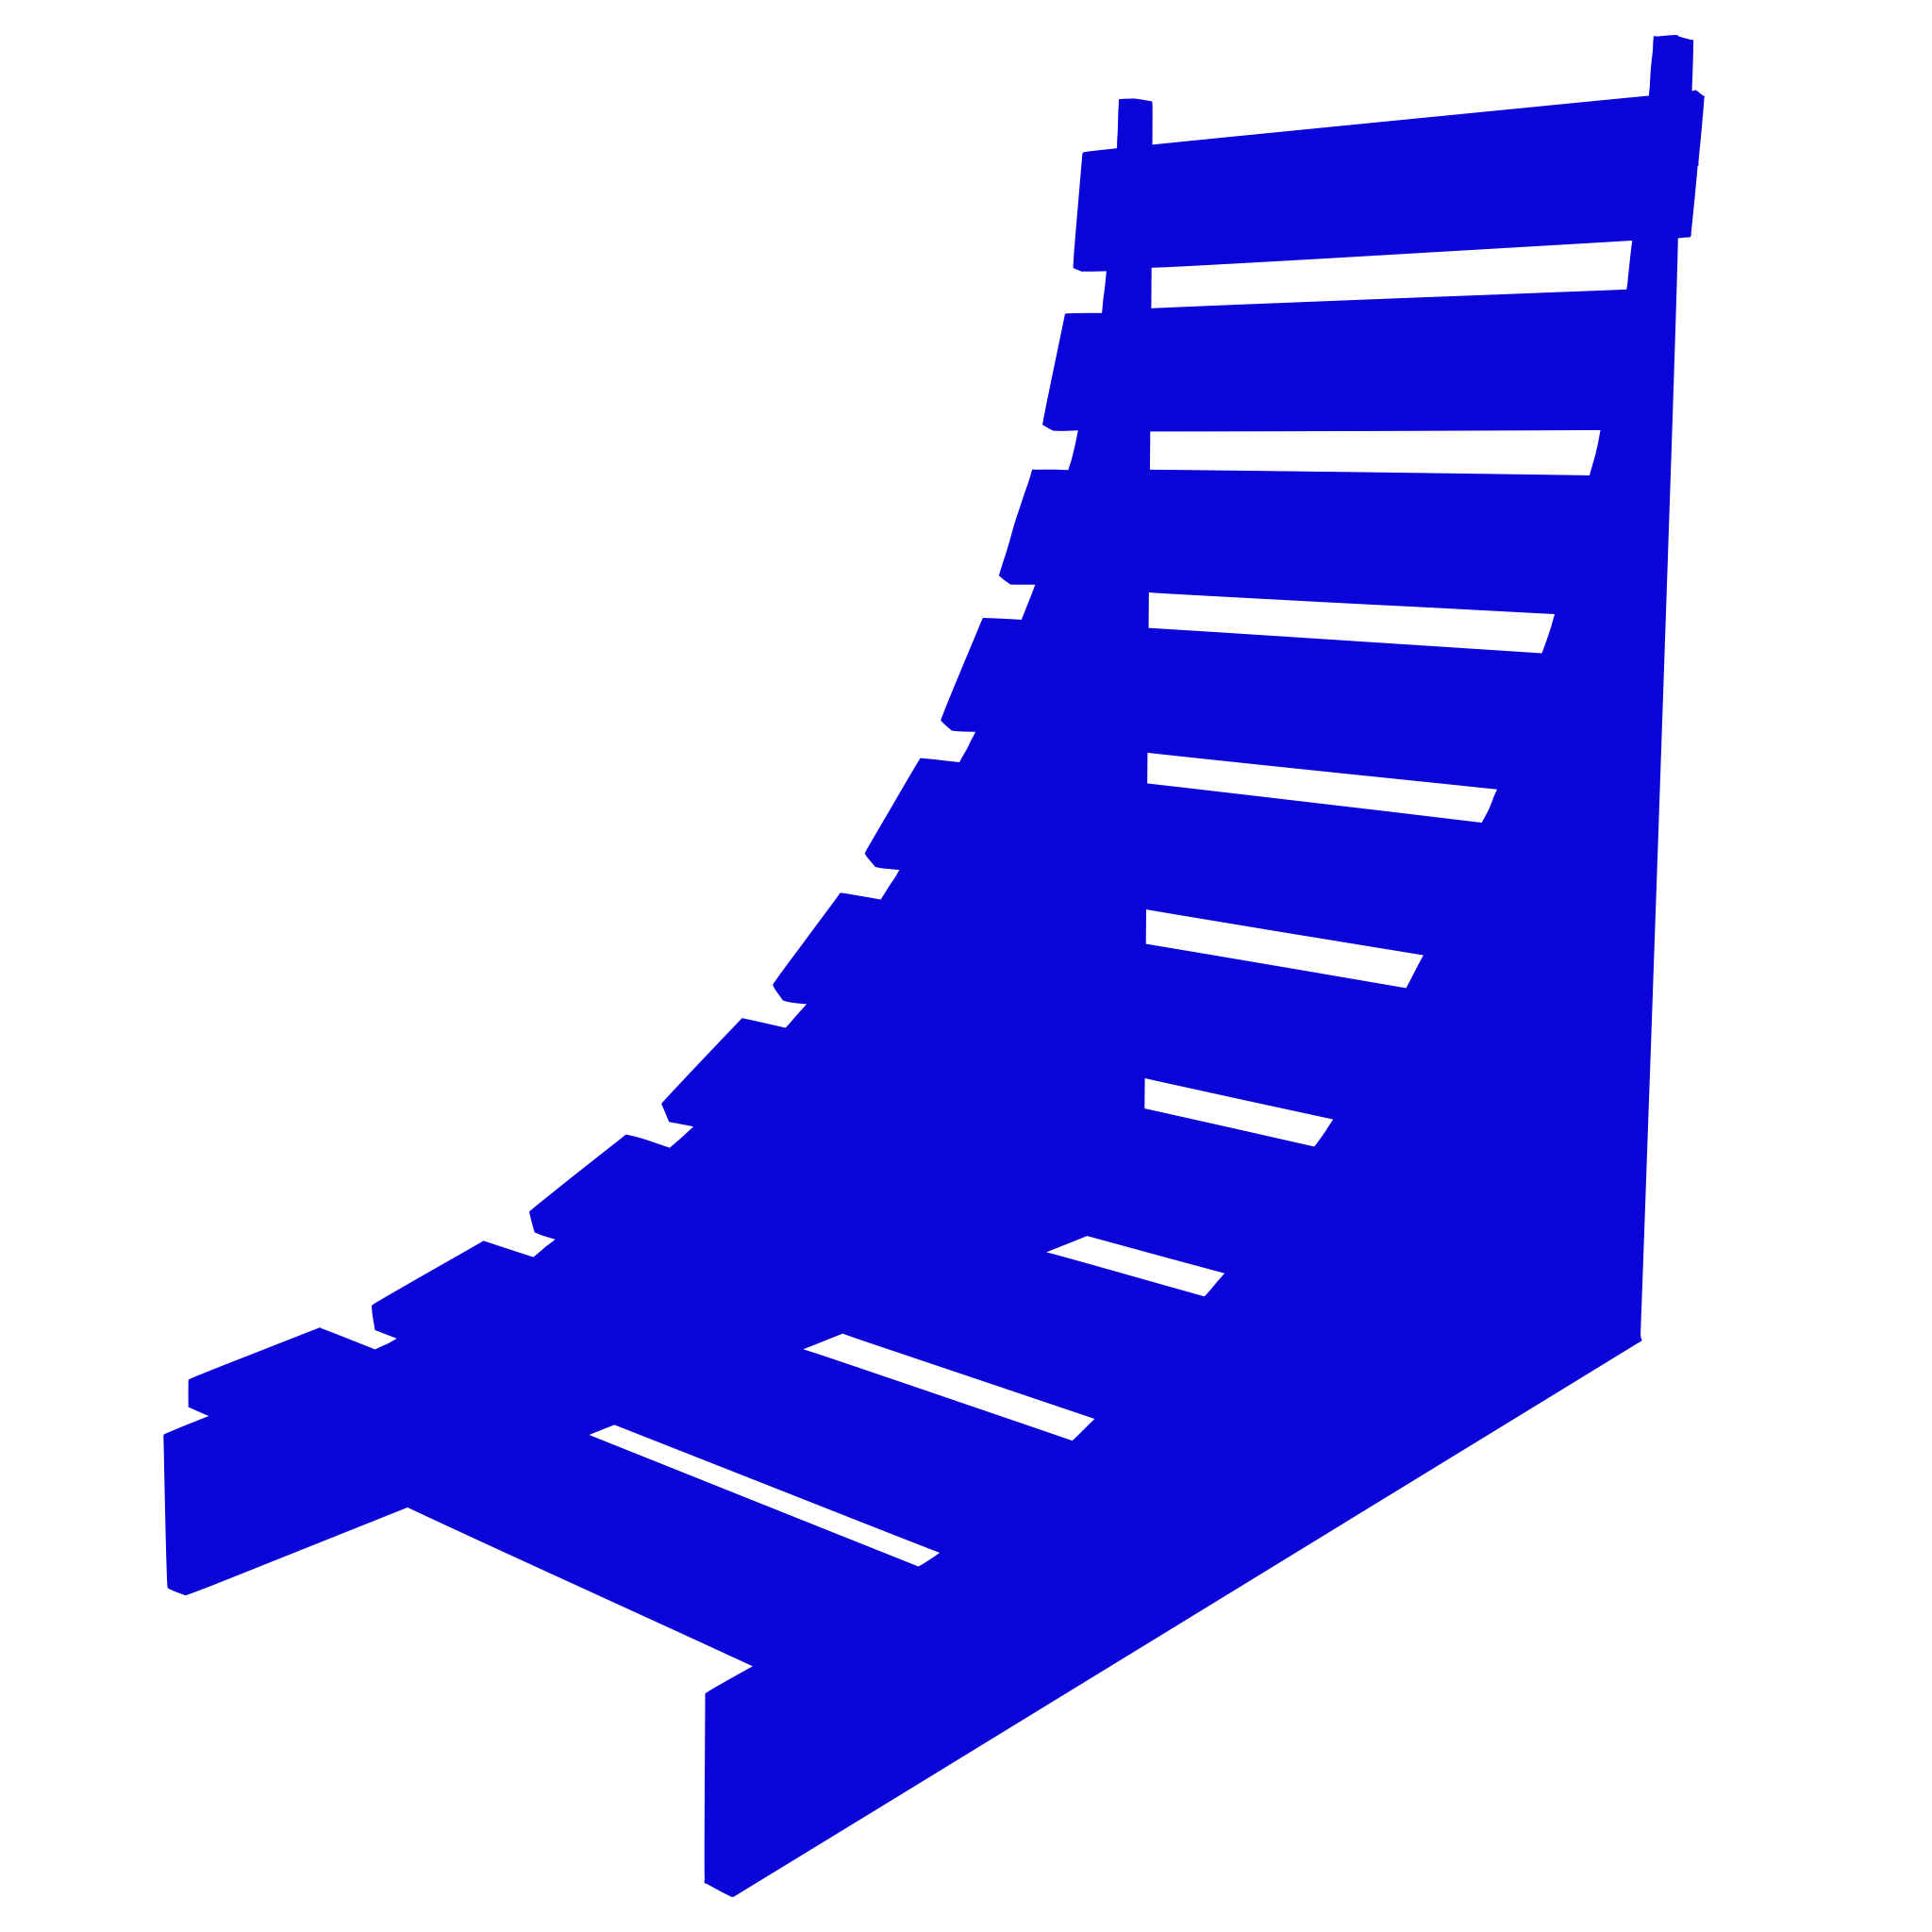 Blue digital drawing, ramp-like structure